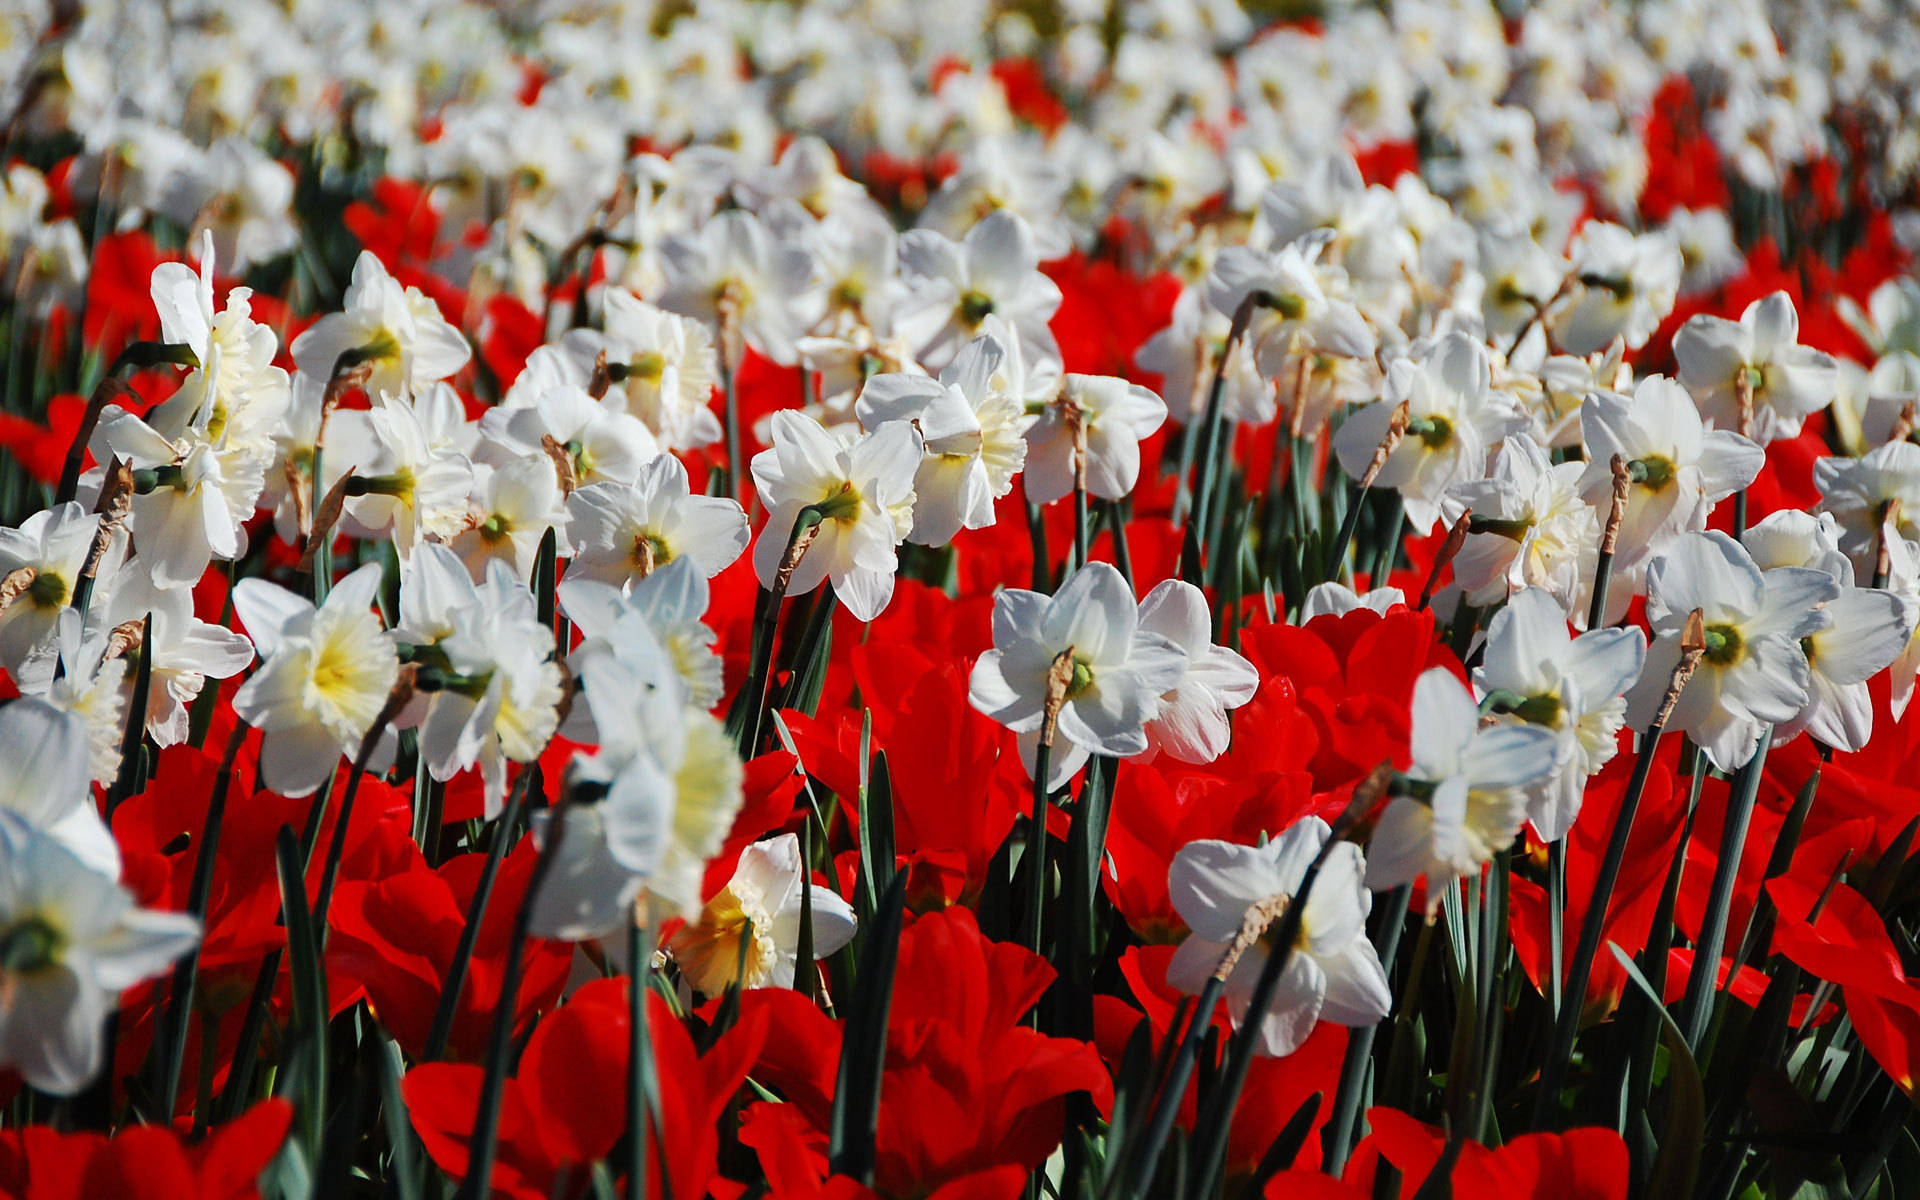 Caption: Vibrant Daffodils Blooming Beside Red Flowers Background